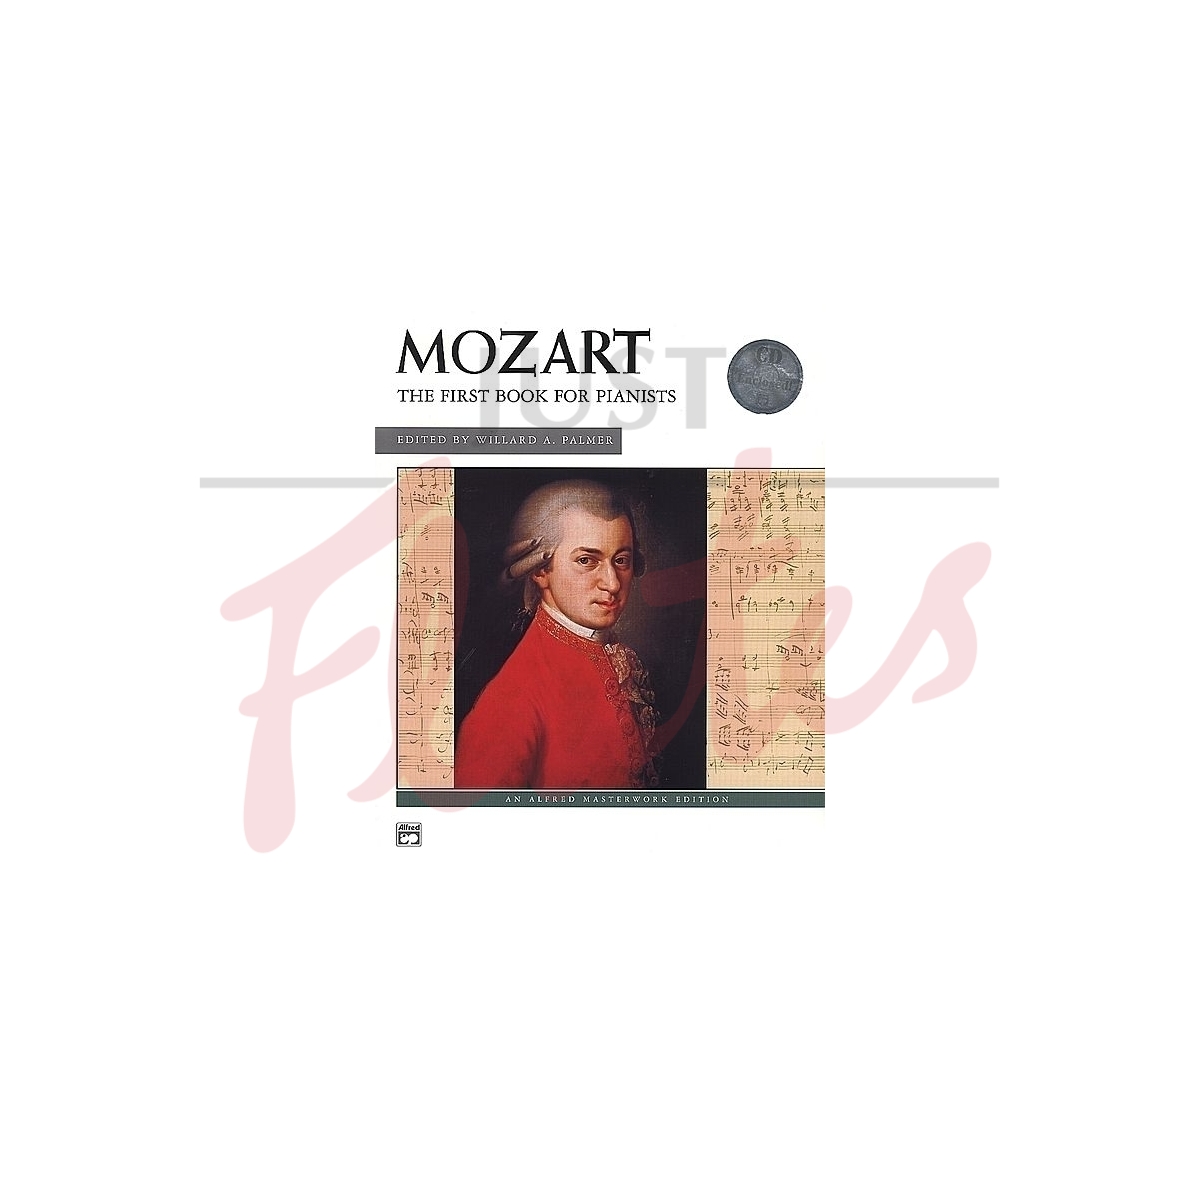 Mozart: The First Book for Pianists